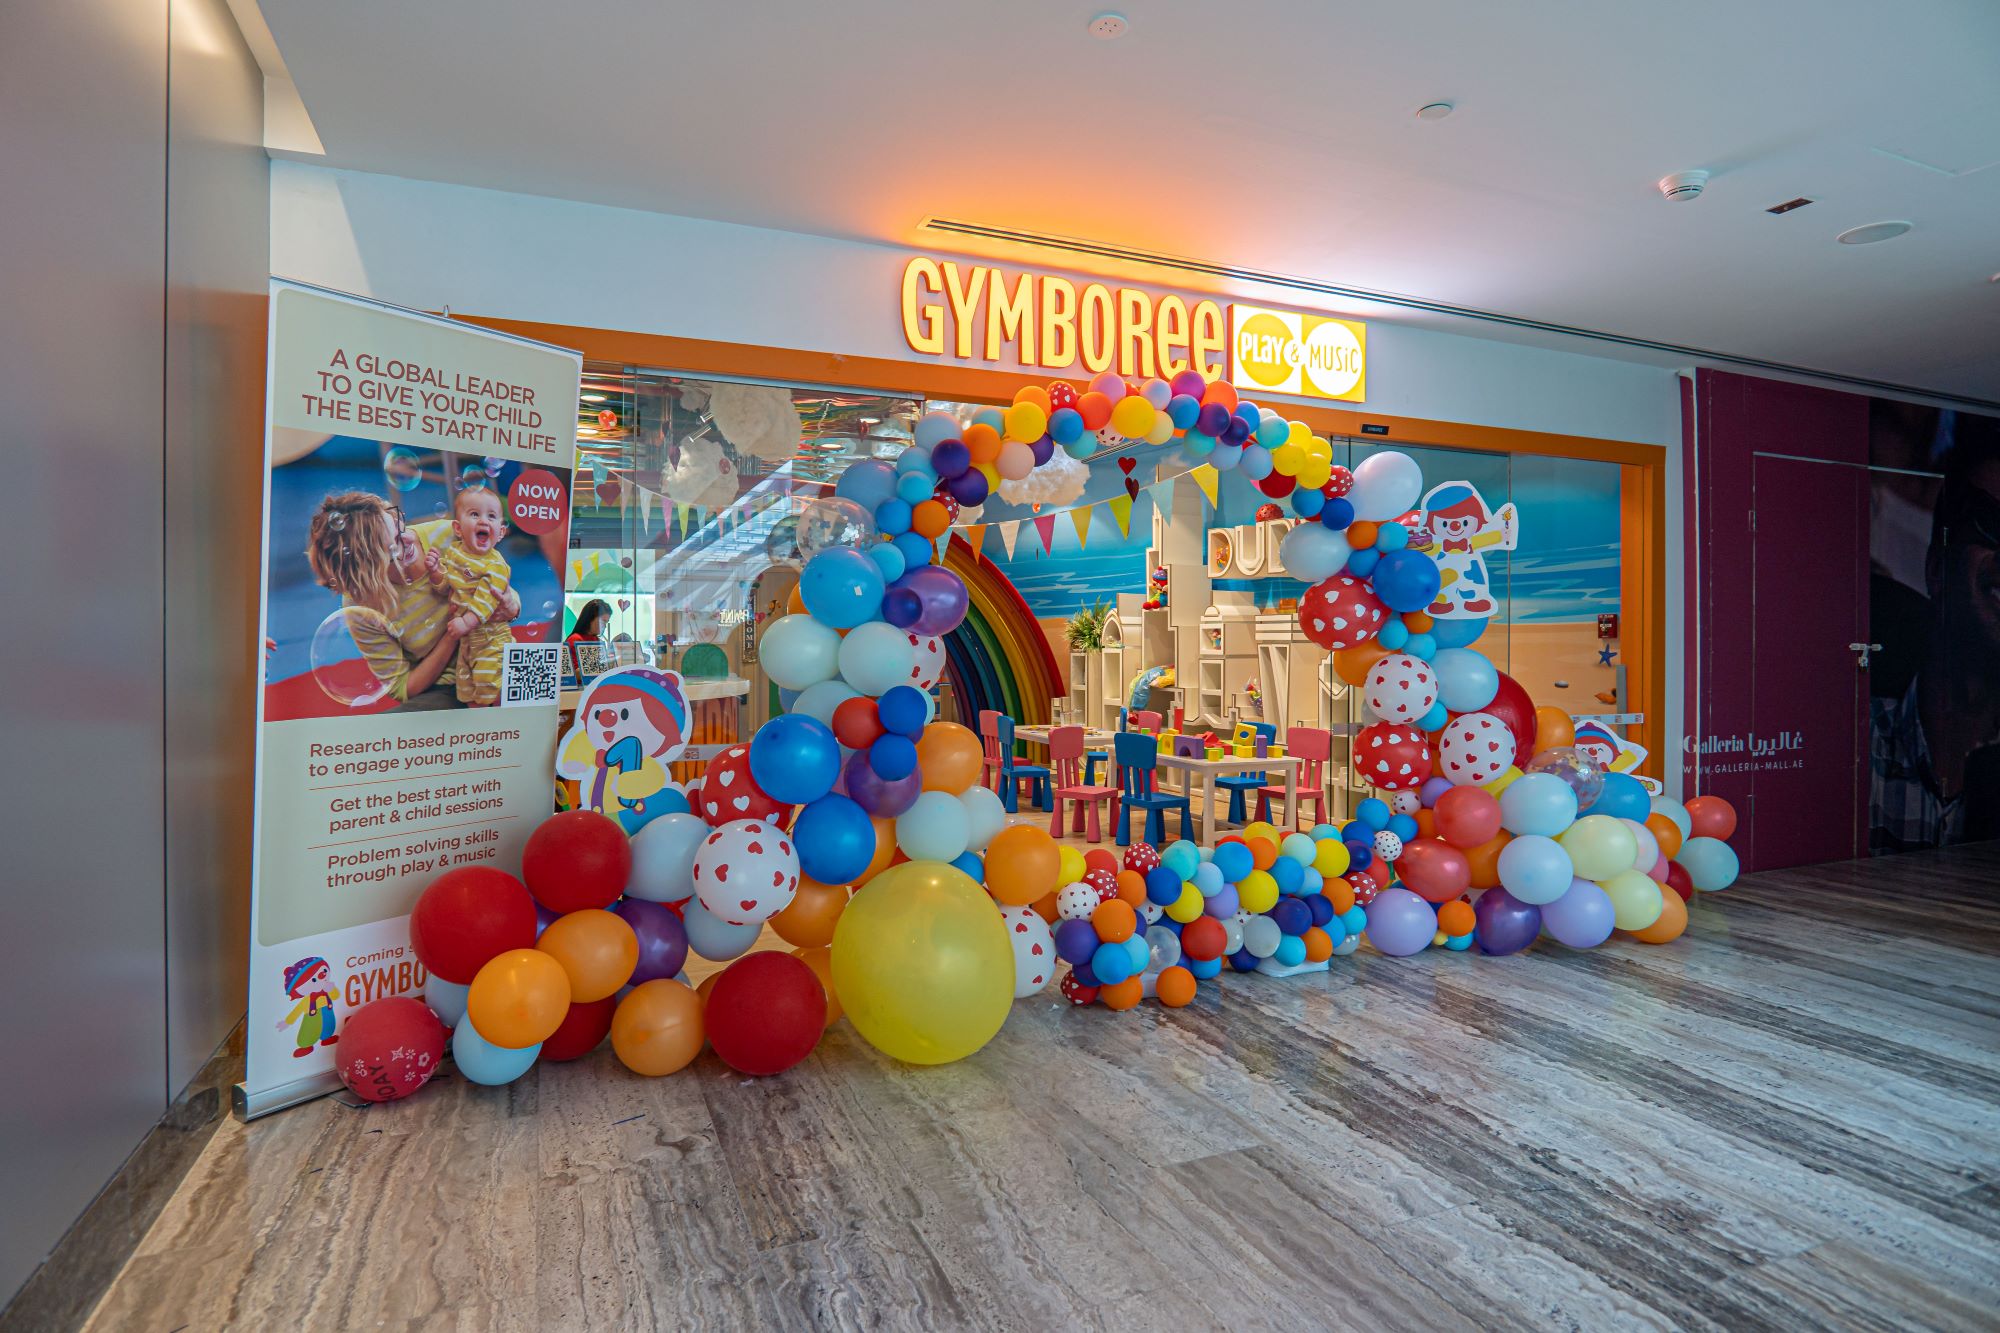 Gymboree Play and Music Dubai to Host Sweetheart Party: A